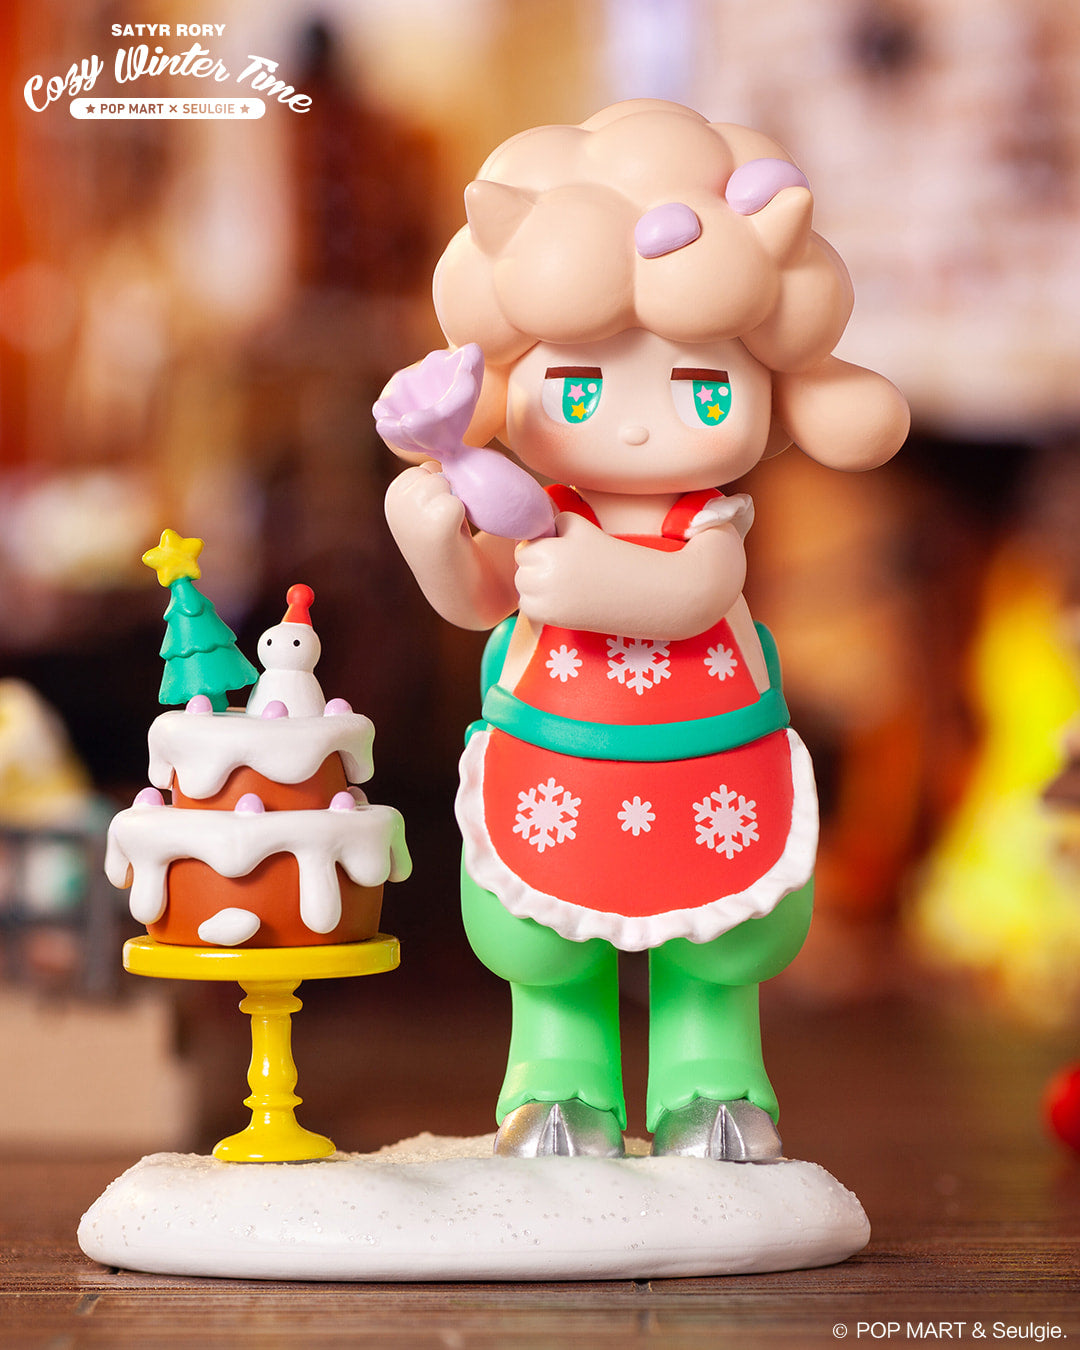 Satyr Rory Cozy Winter Time Blind box Series by Seulgie x Pop Mart